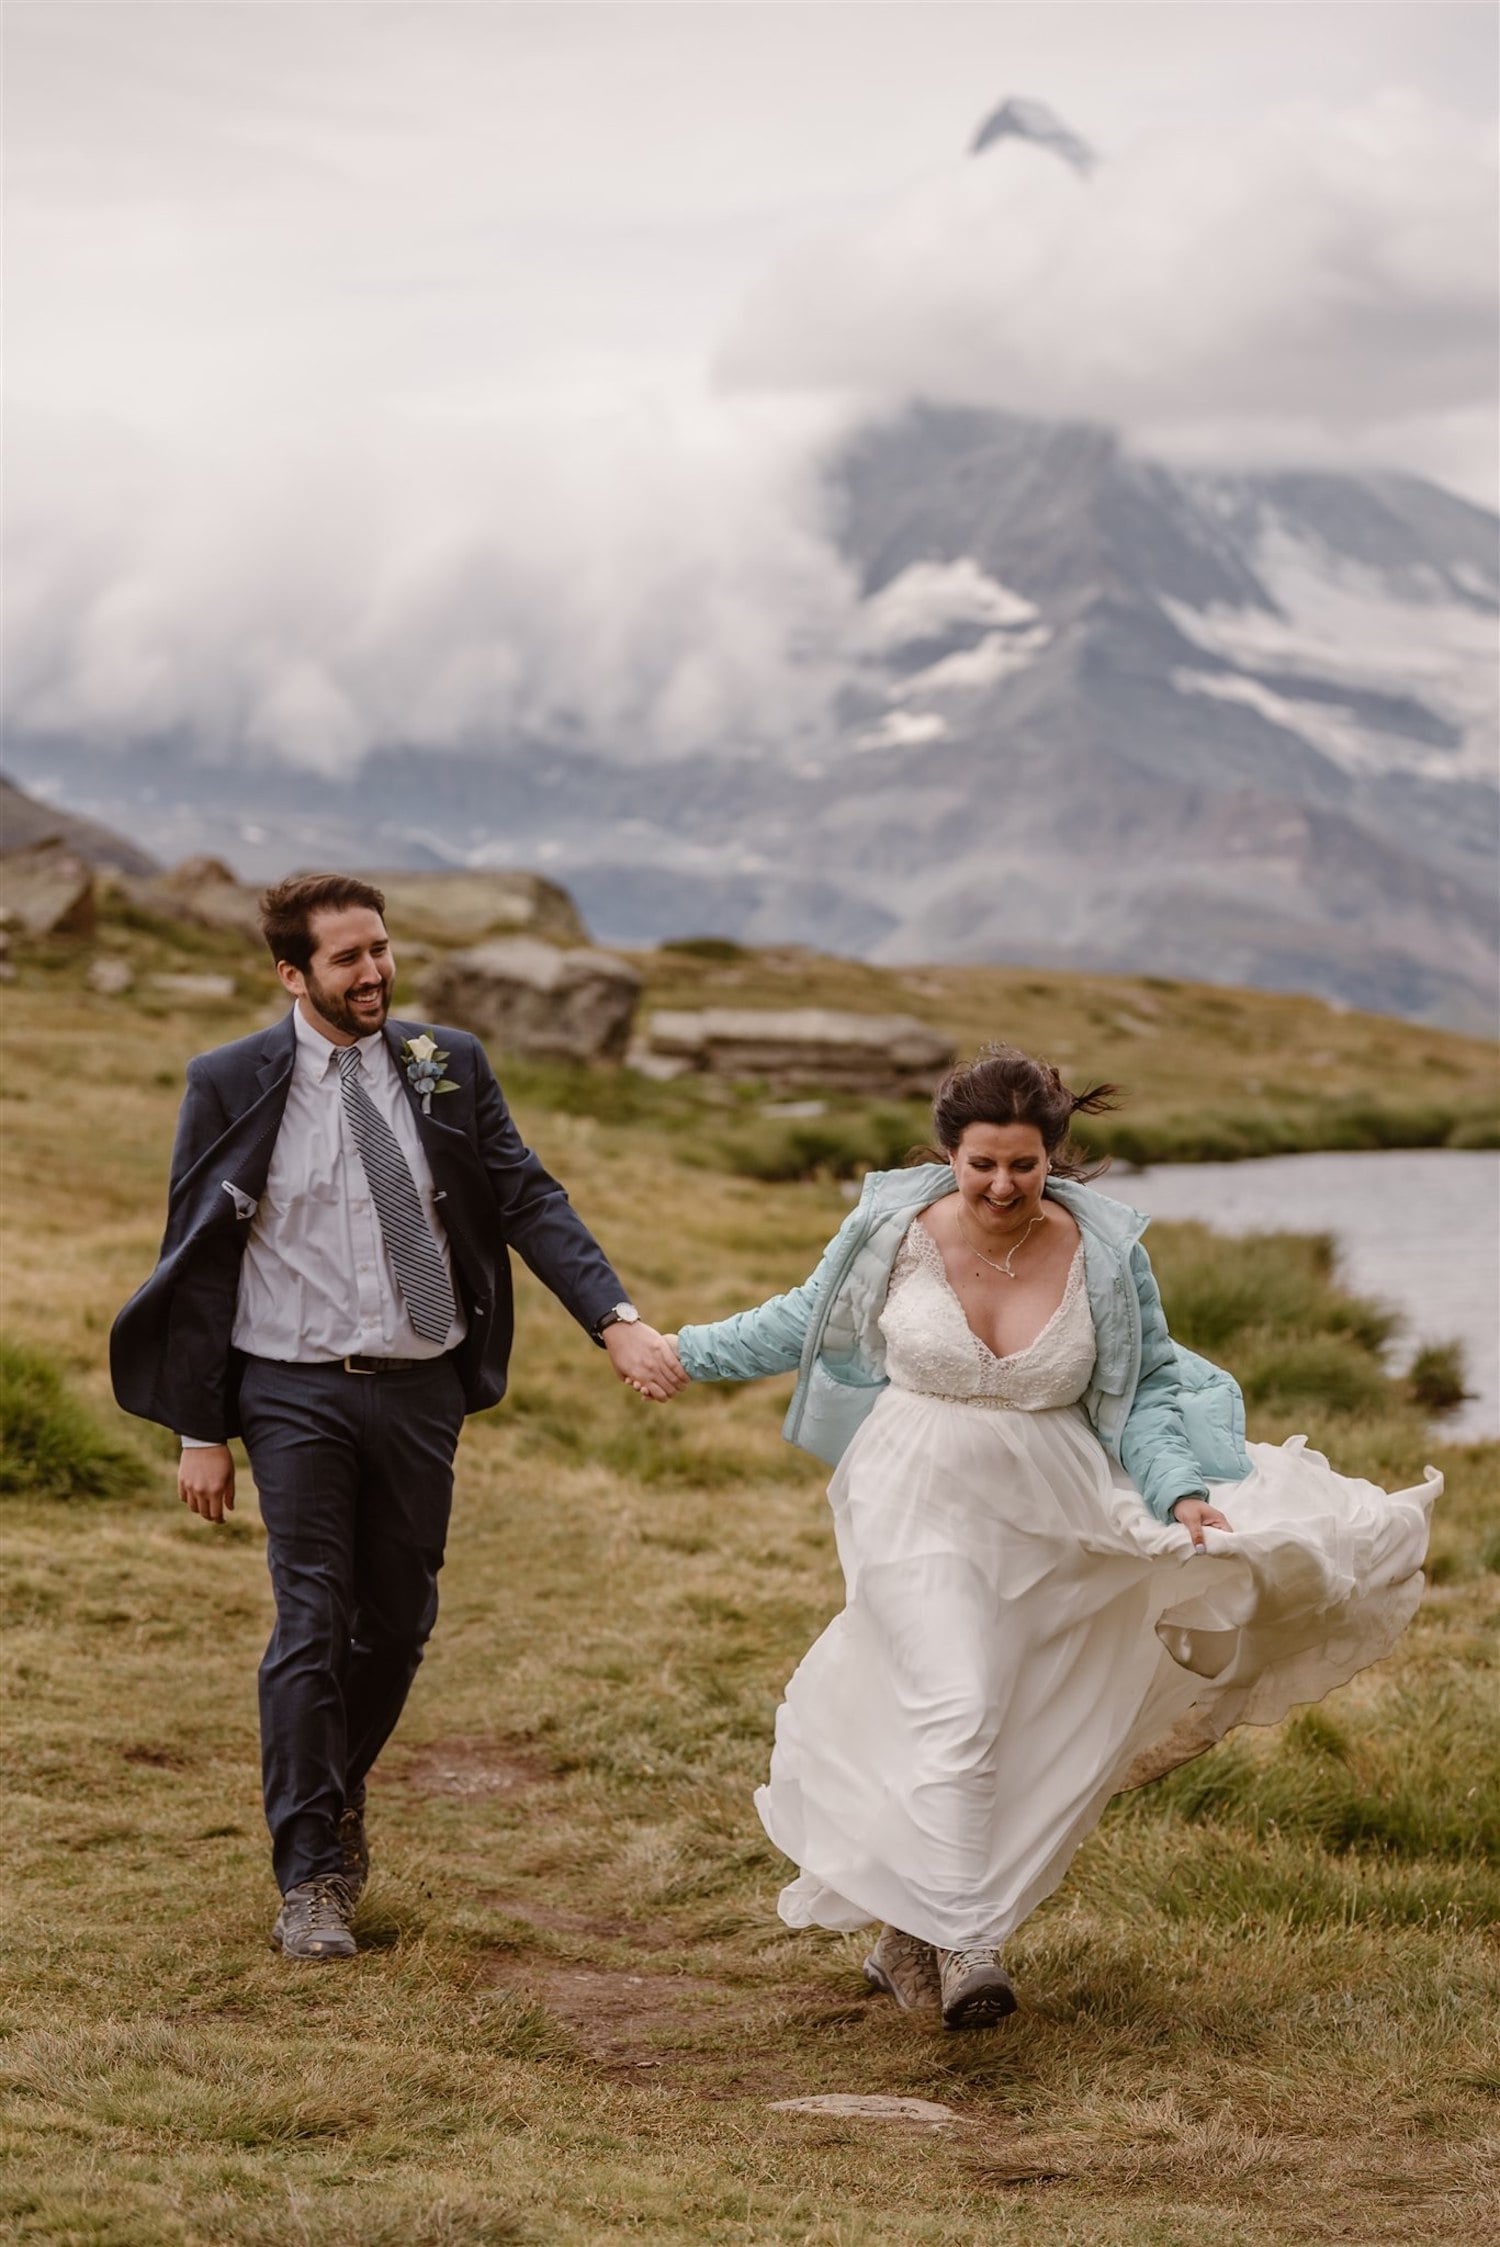 Bride and groom happily running in front of the Matterhorn